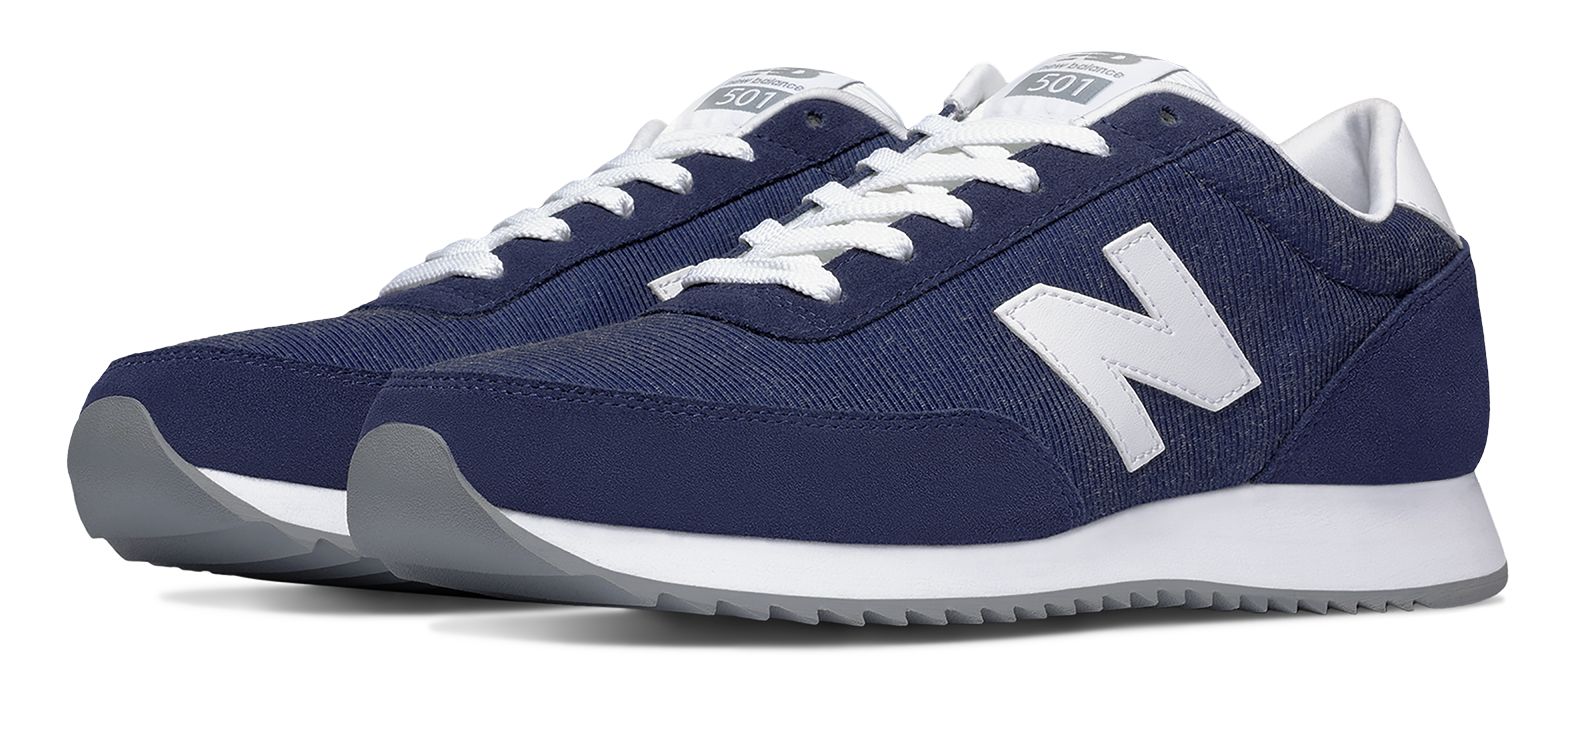 New Balance MZ501-NT on Sale - Discounts Up to 38% Off on MZ501NOD at Joe's New  Balance Outlet